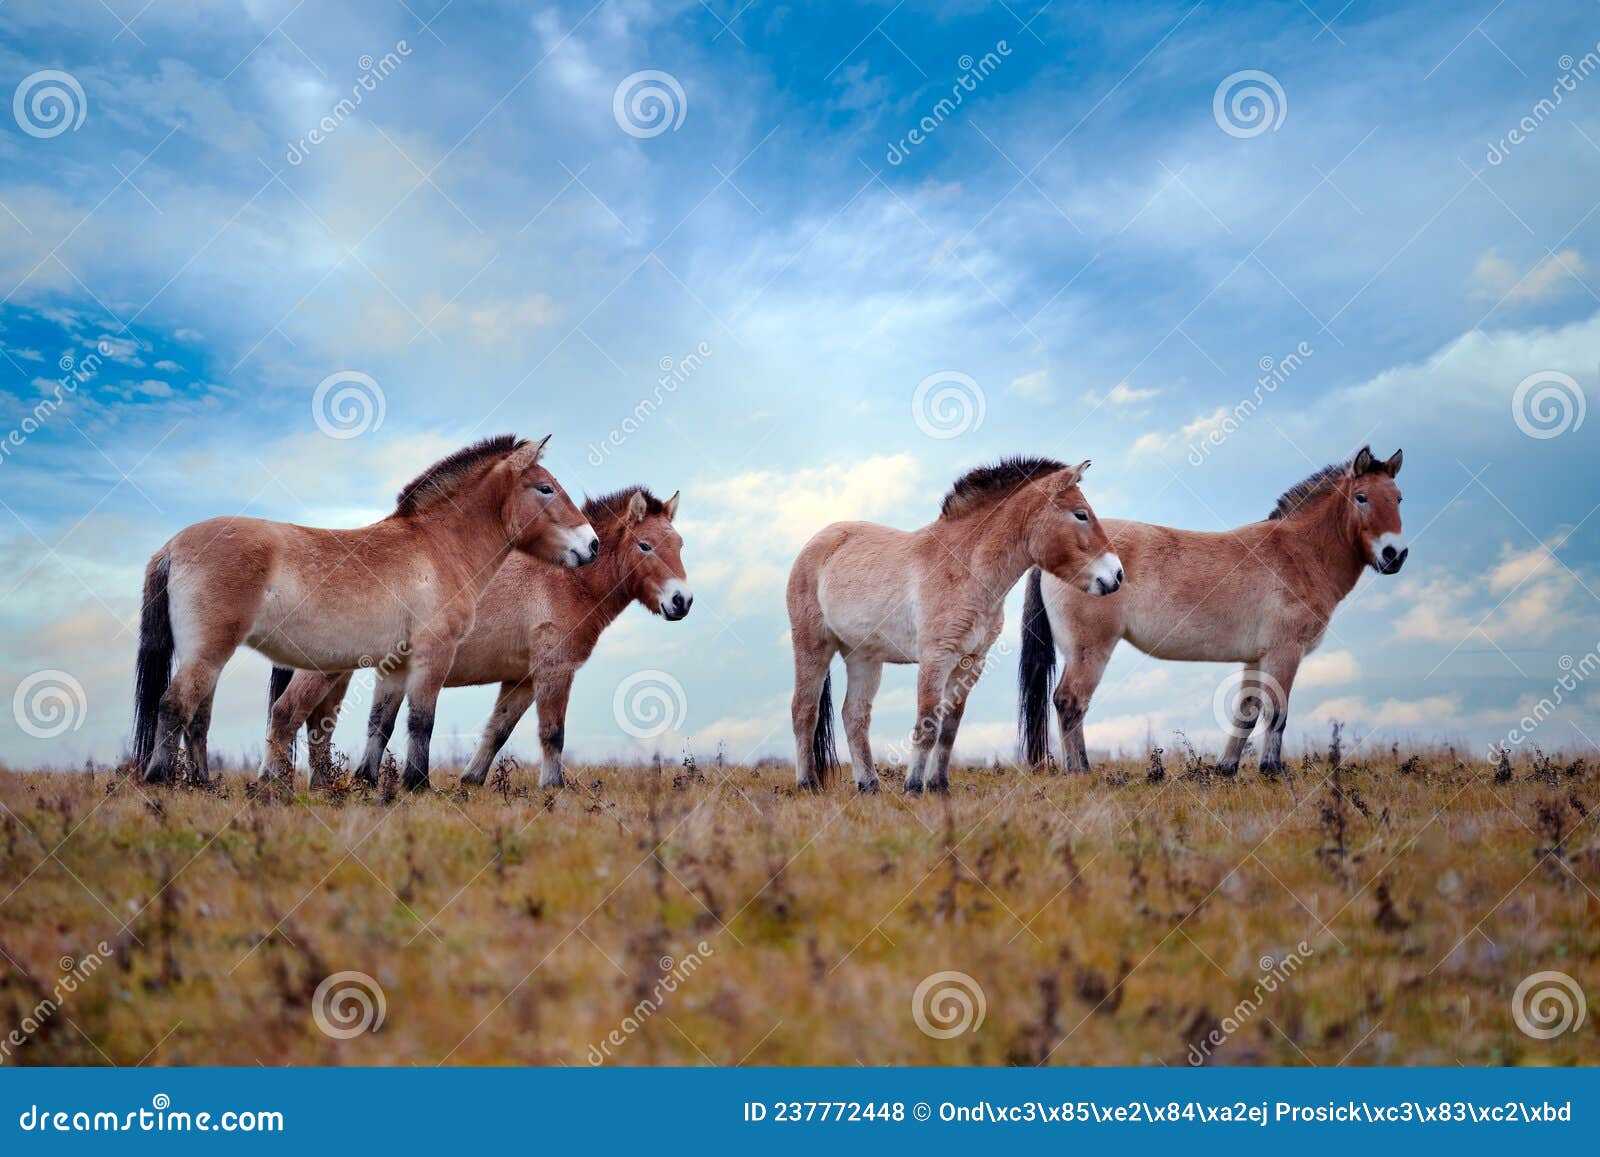 przewalski`s horse with magical evening sky, nature habitat in mongolia. horse in stepee grass. wildlife in mongolia. equus ferus